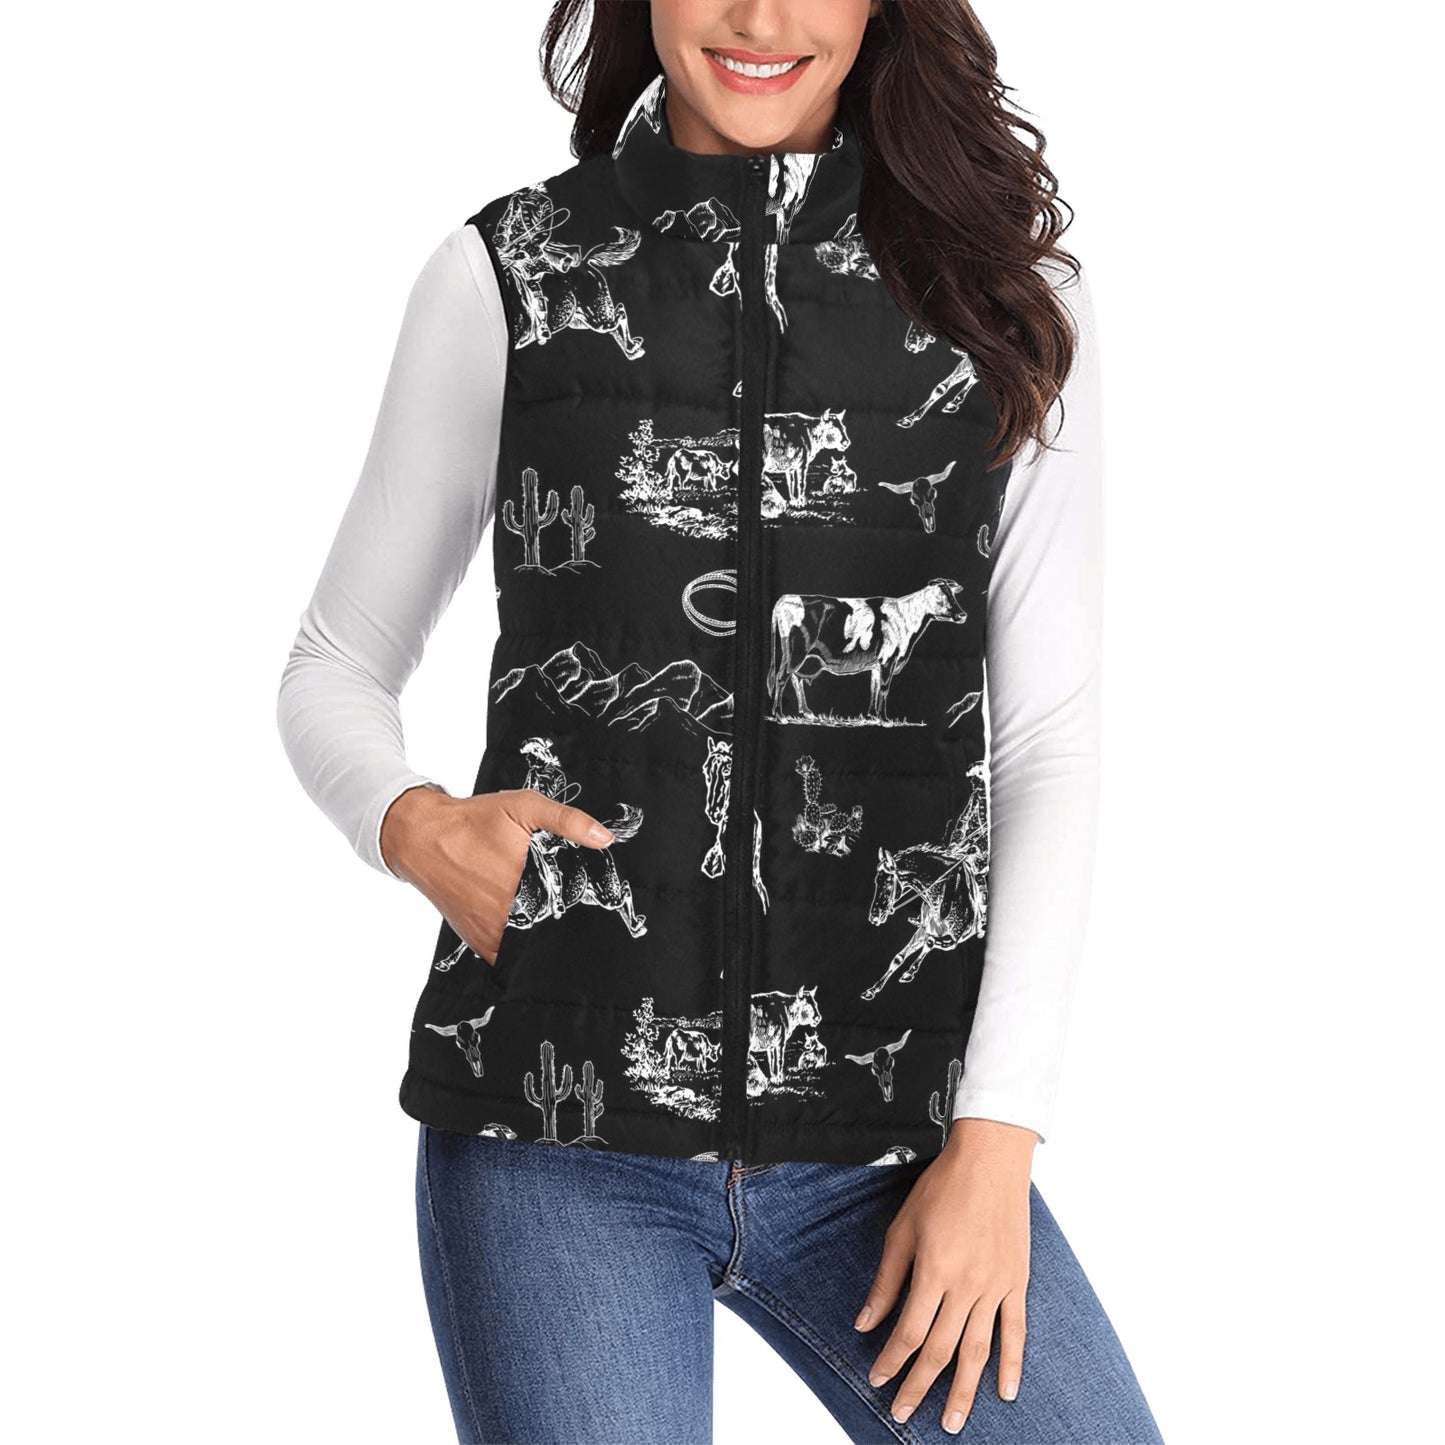 Ranch Life Puffy Vest